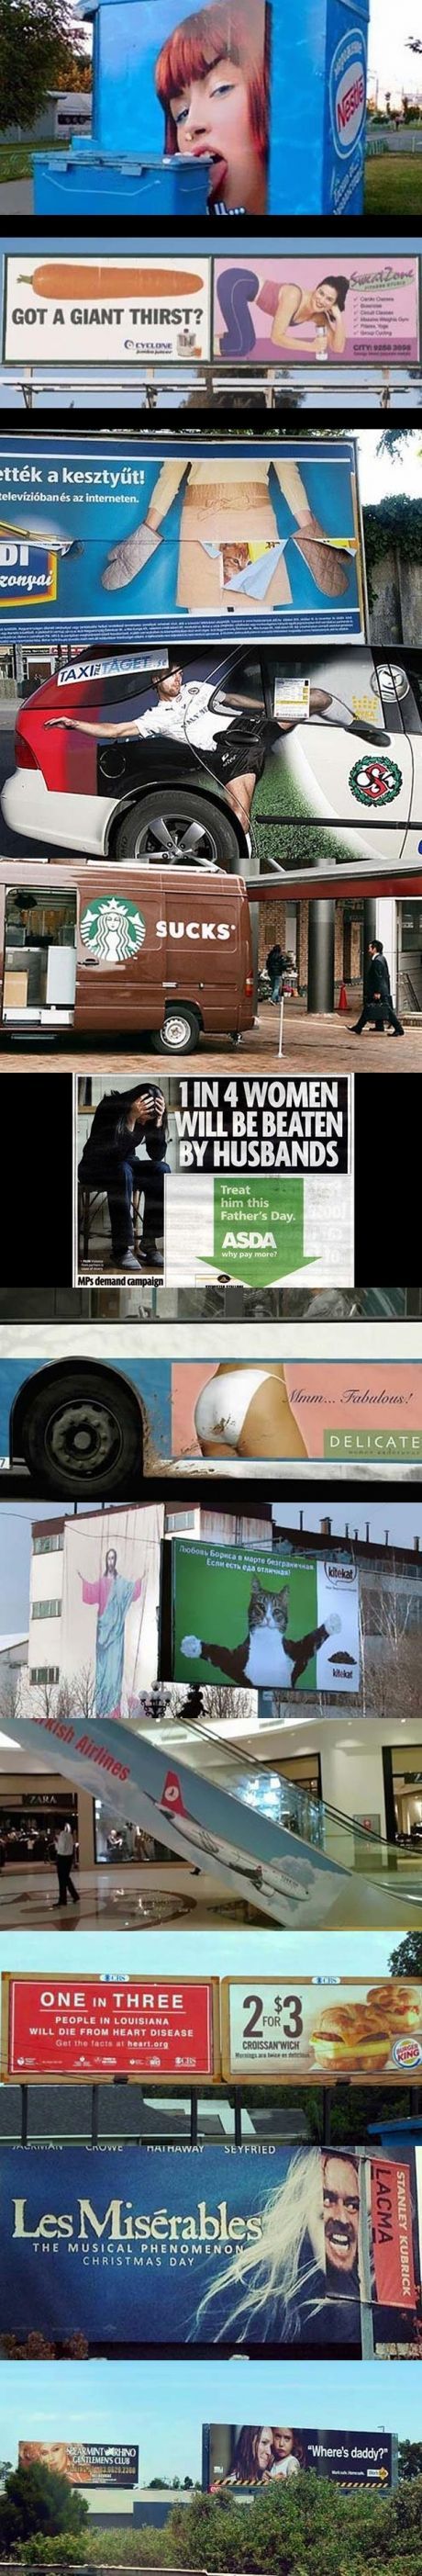 Awkward Ad Placements!